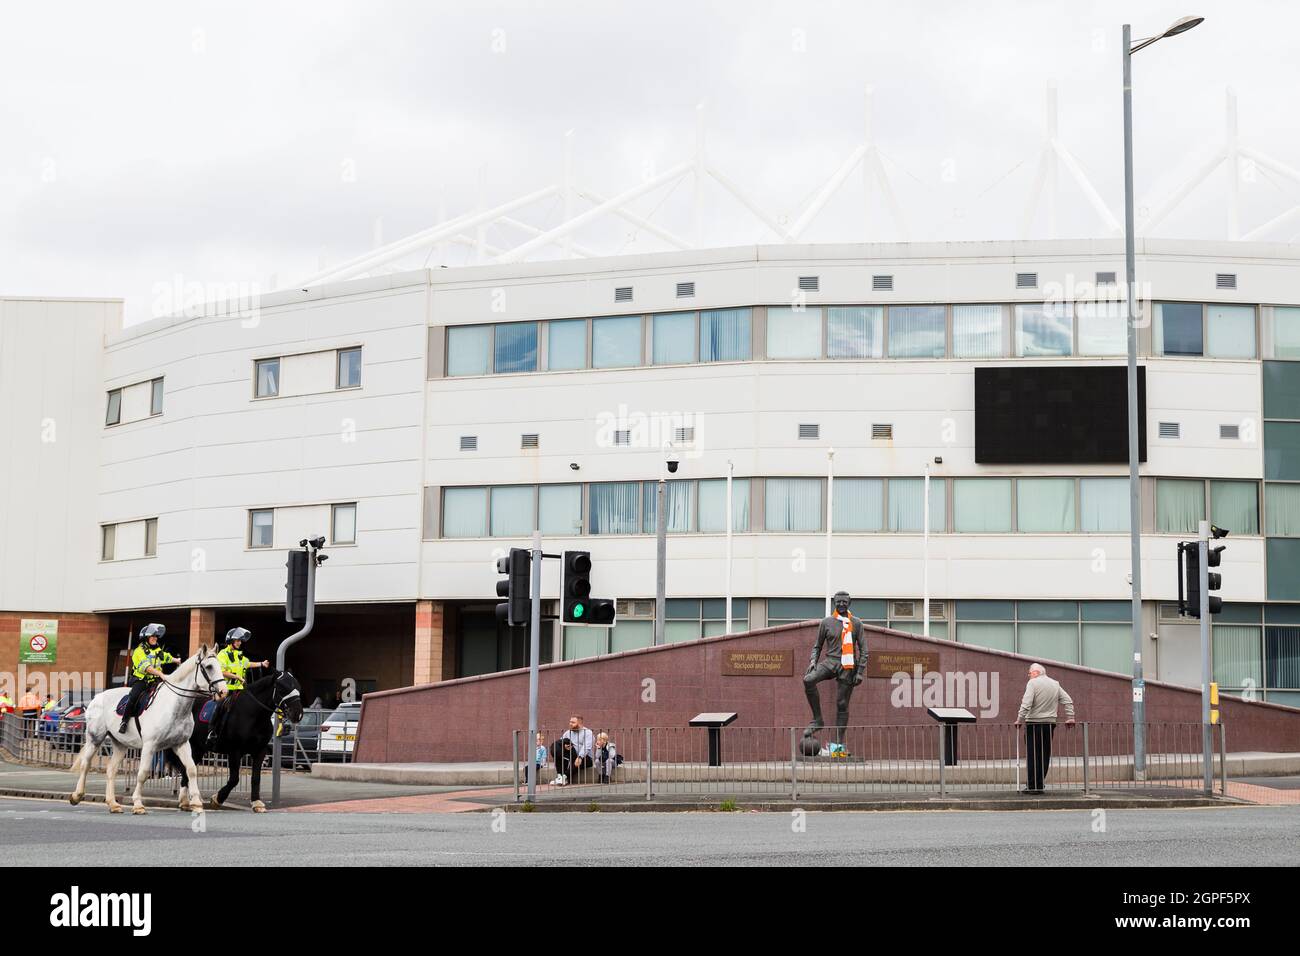 Police on horseback outside Bloomfield Road stadium on a matchday in September 2021 as Blackpool FC welcomed Barnsley FC. Stock Photo